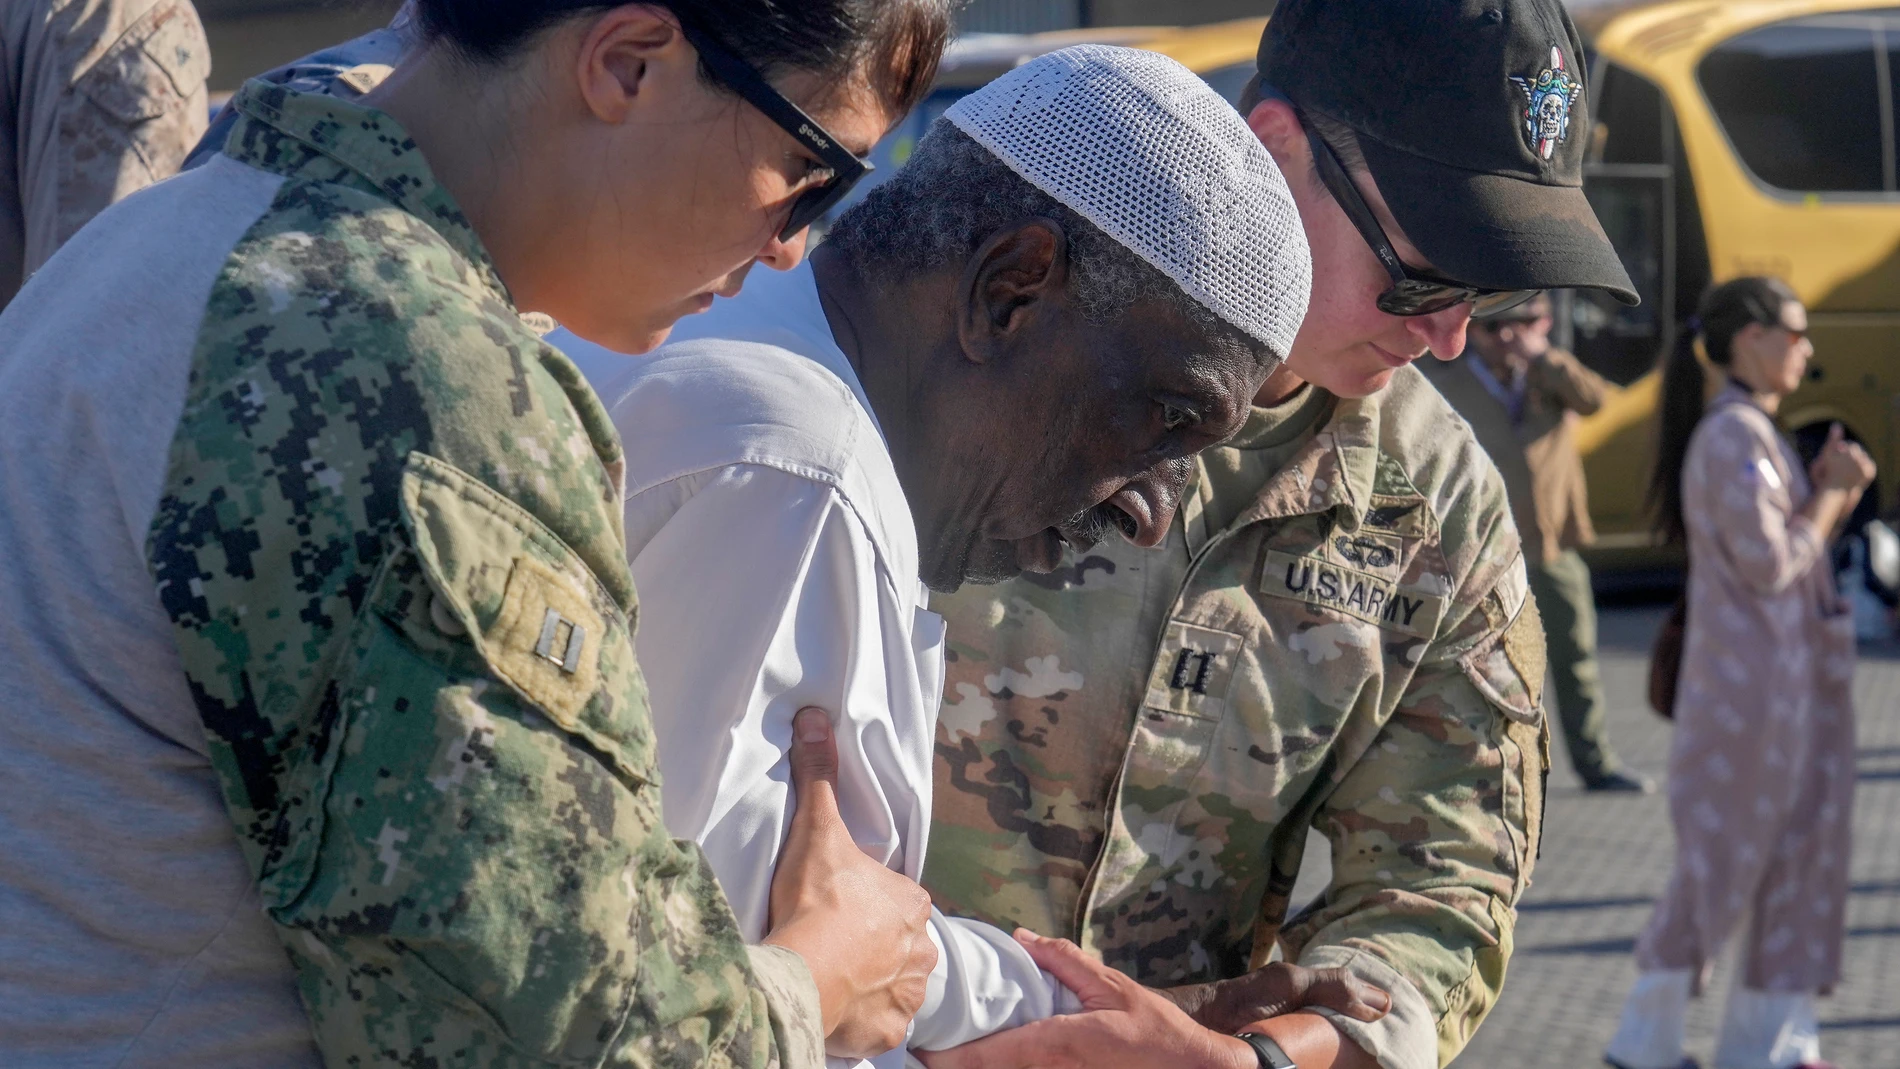 Sudanese evacuee, Mohammed Abdel Rahman, 78, is helped by US naval doctors as he disembarks from the USNS Brunswick at Jeddah port, Saudi Arabia, Thursday, May 4, 2023. The Sudan fighting, which broke out after months of escalating tension between the country’s military and a rival paramilitary group, has so far killed 550 people and displaced hundreds of thousands. (AP Photo/Amr Nabil)